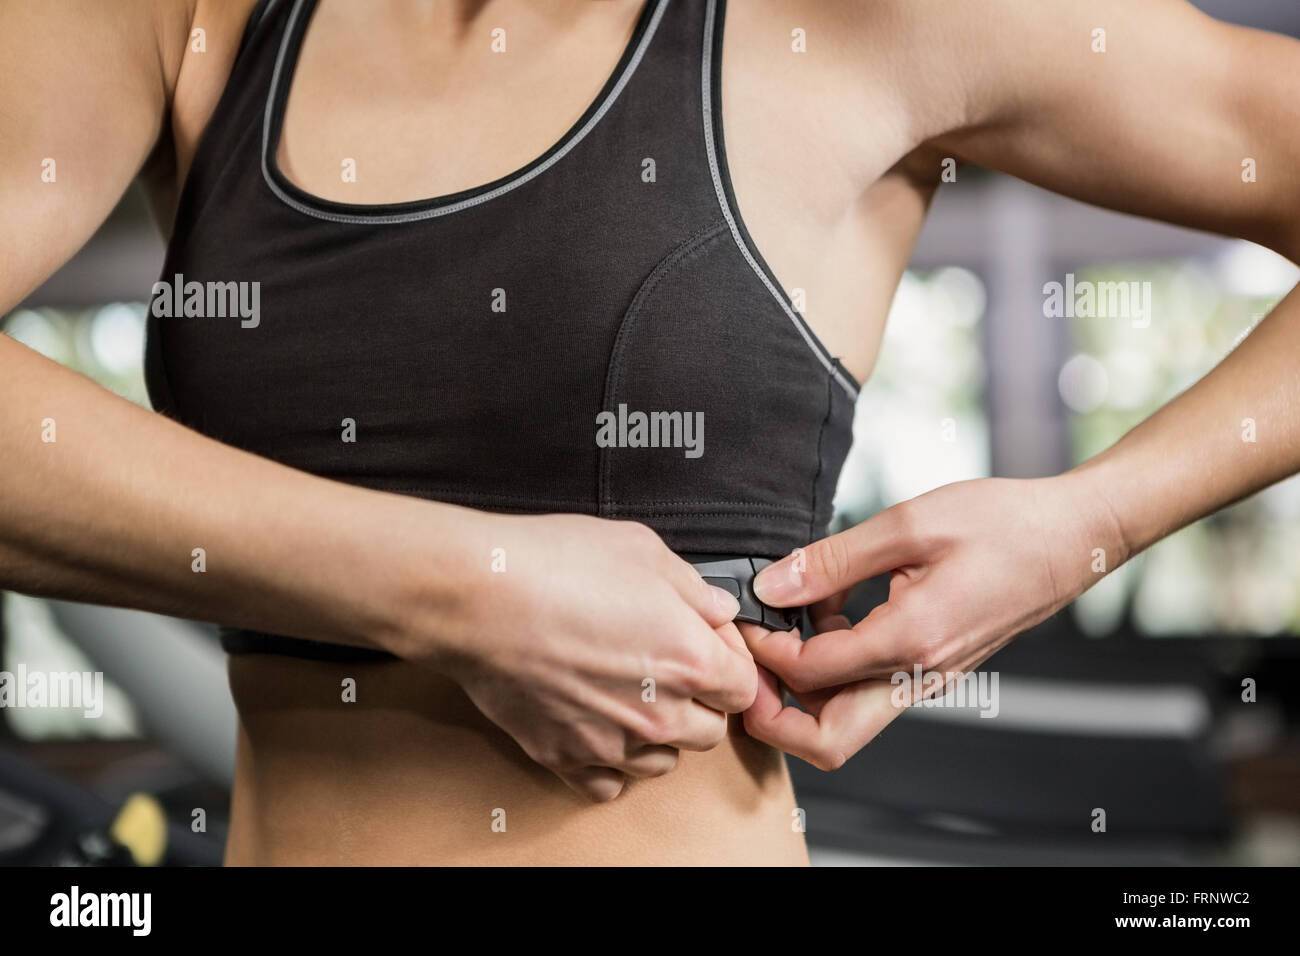 Personal Perspective Womens Legs During A Workout Next To Fitness  Accessories Heart Rate On The Smart Watch Screen Illustration High-Res  Stock Photo - Getty Images